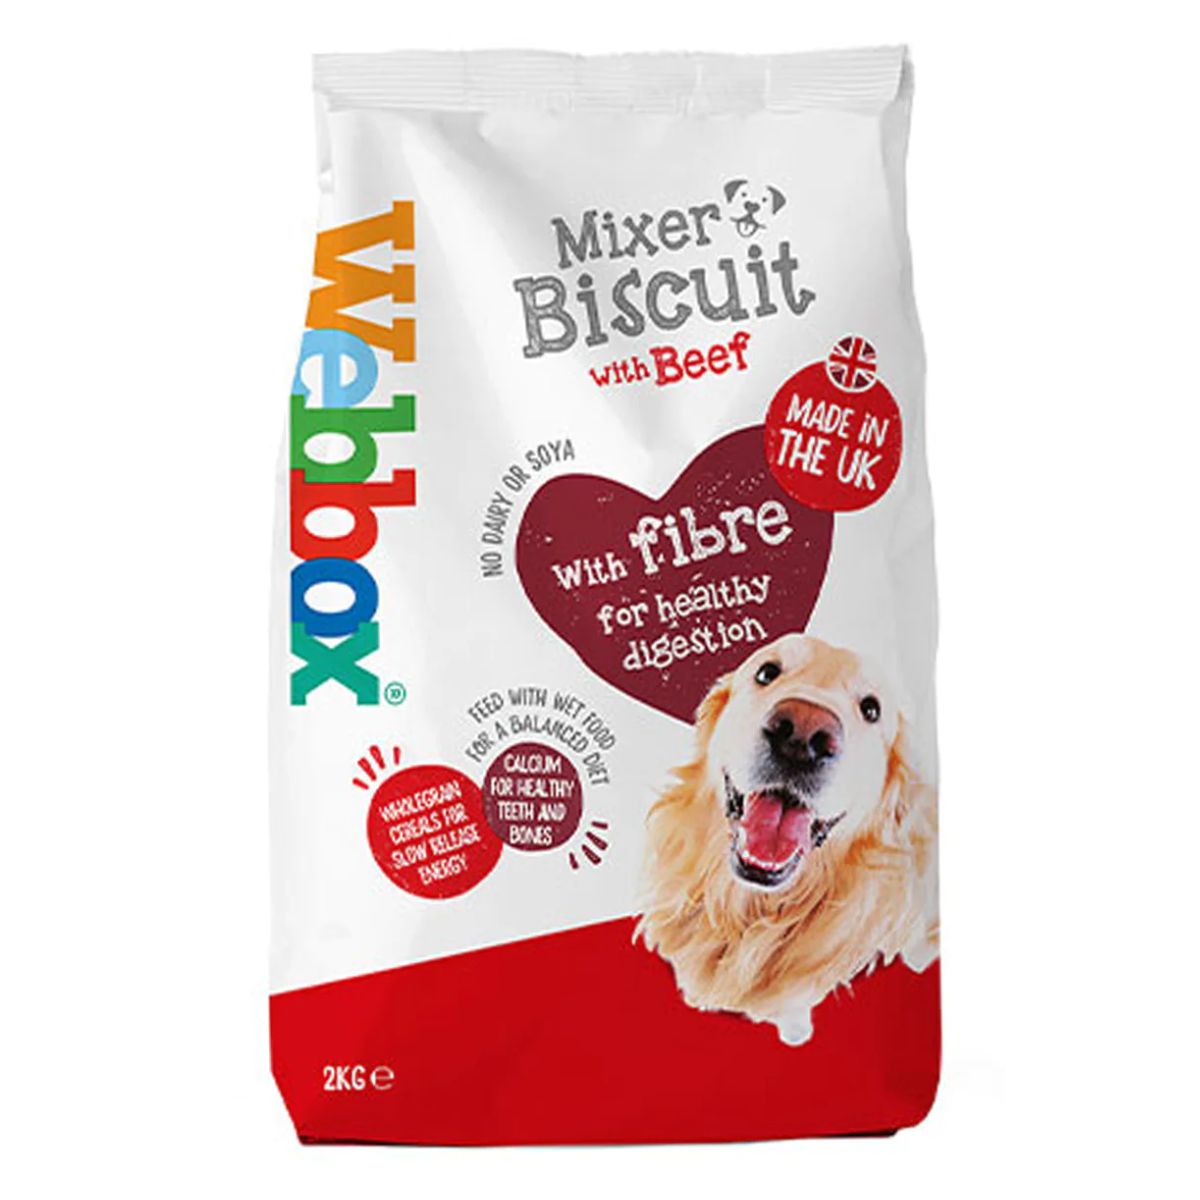 A package of Webbox - Whole Grain Mixer - 2kg dog food, highlighting fiber for healthy digestion and no added soya, made in the uk.